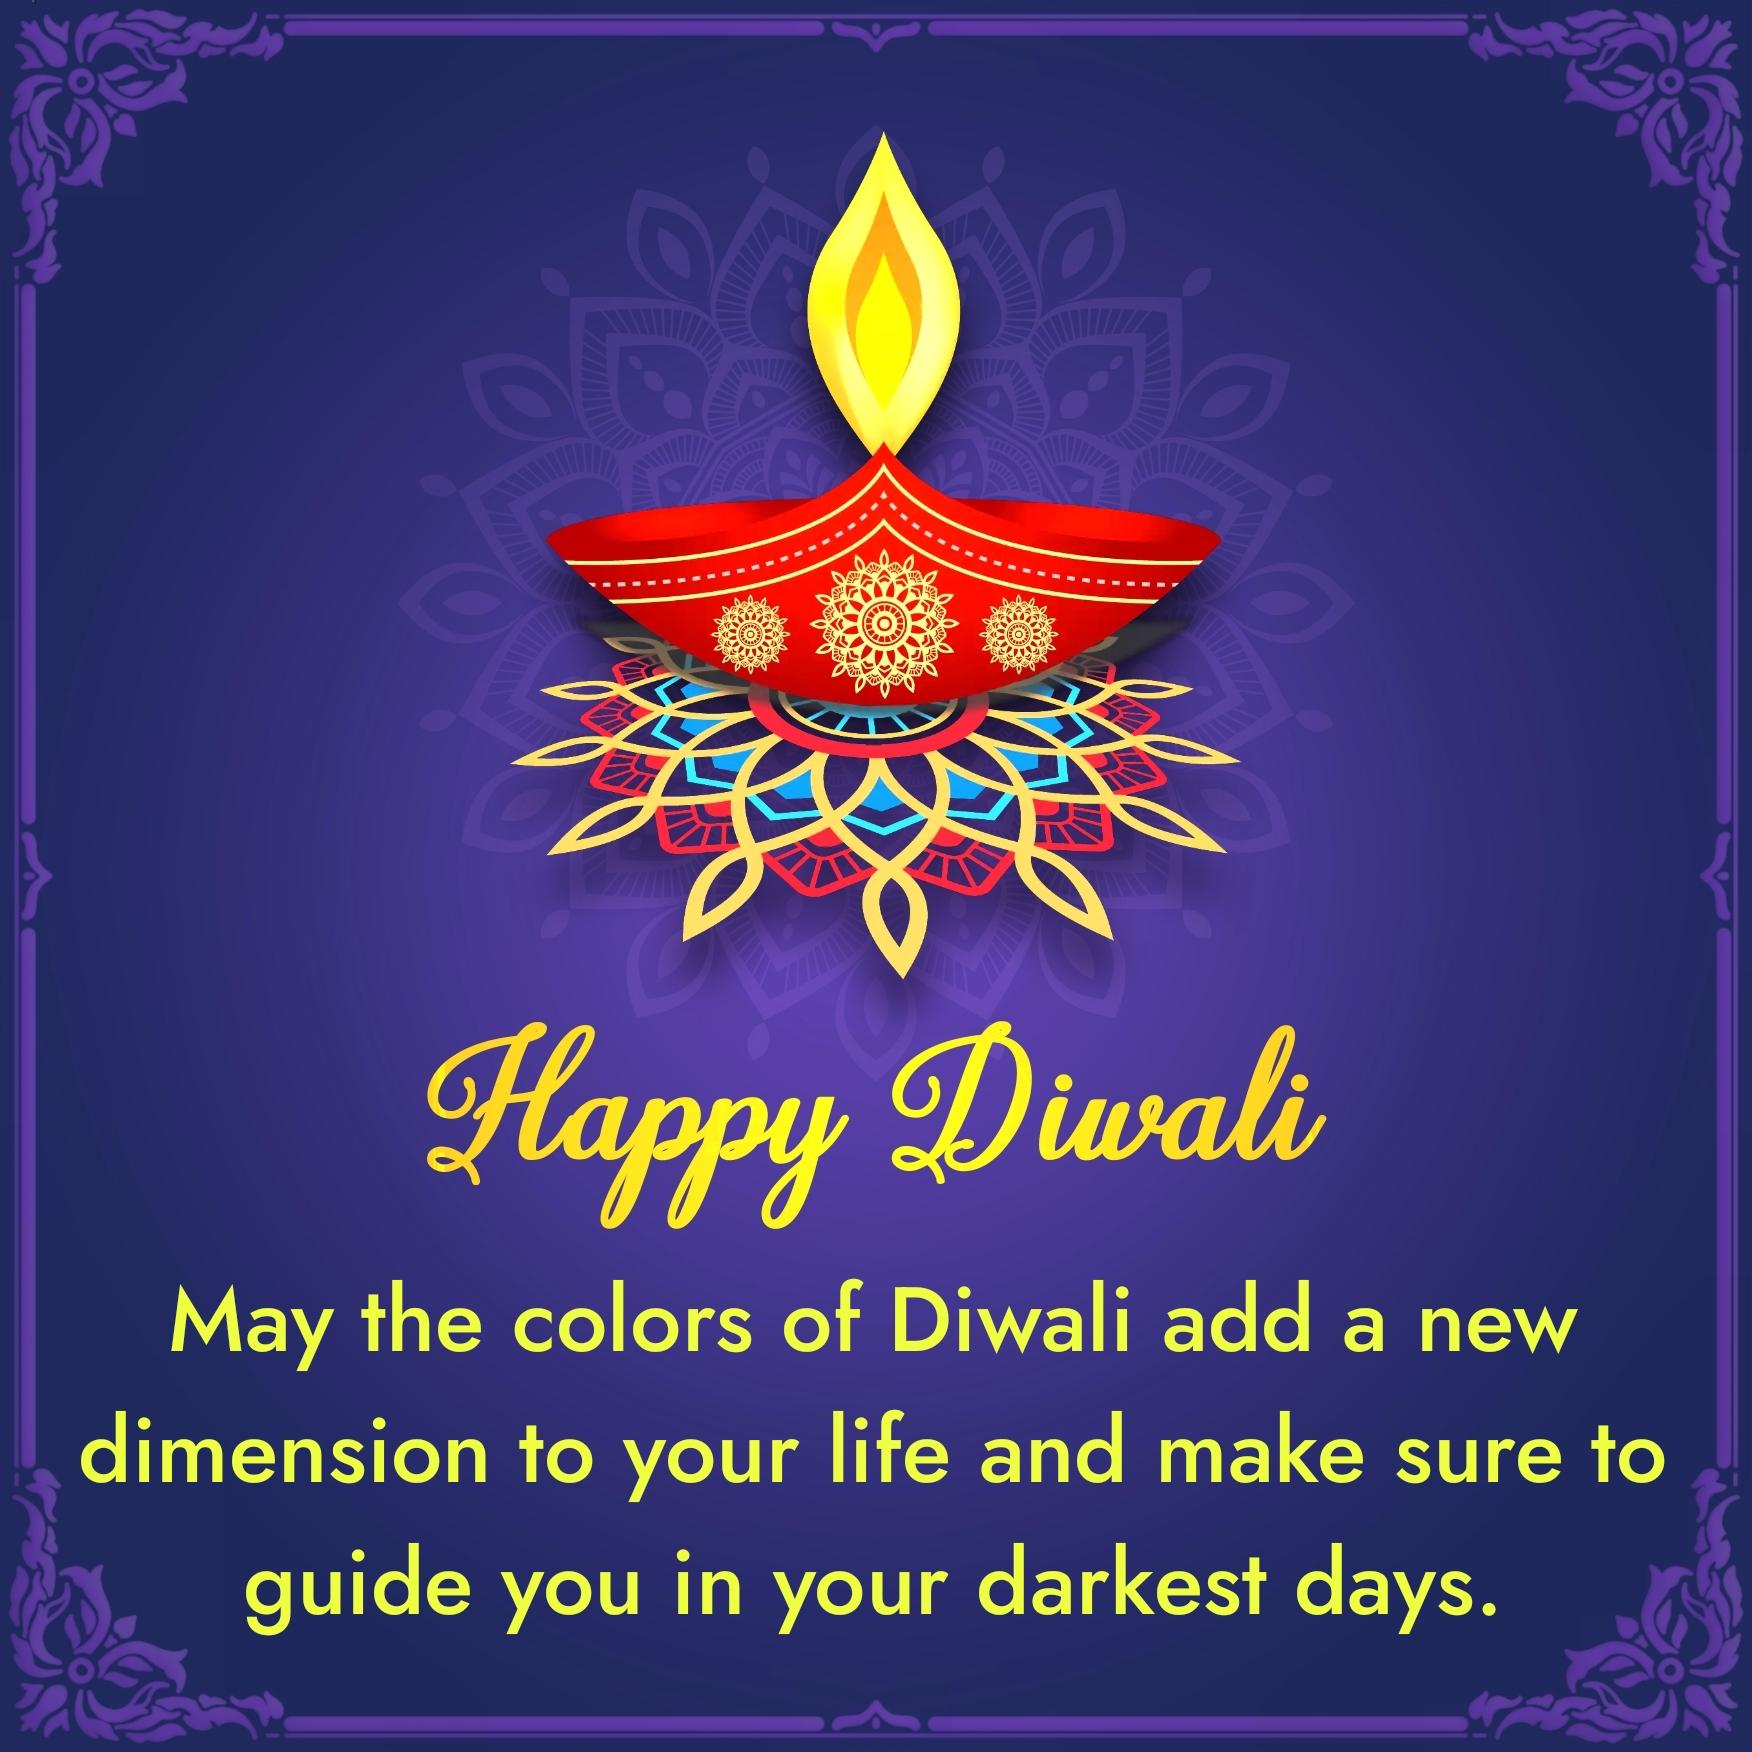 May the colors of Diwali add a new dimension to your life